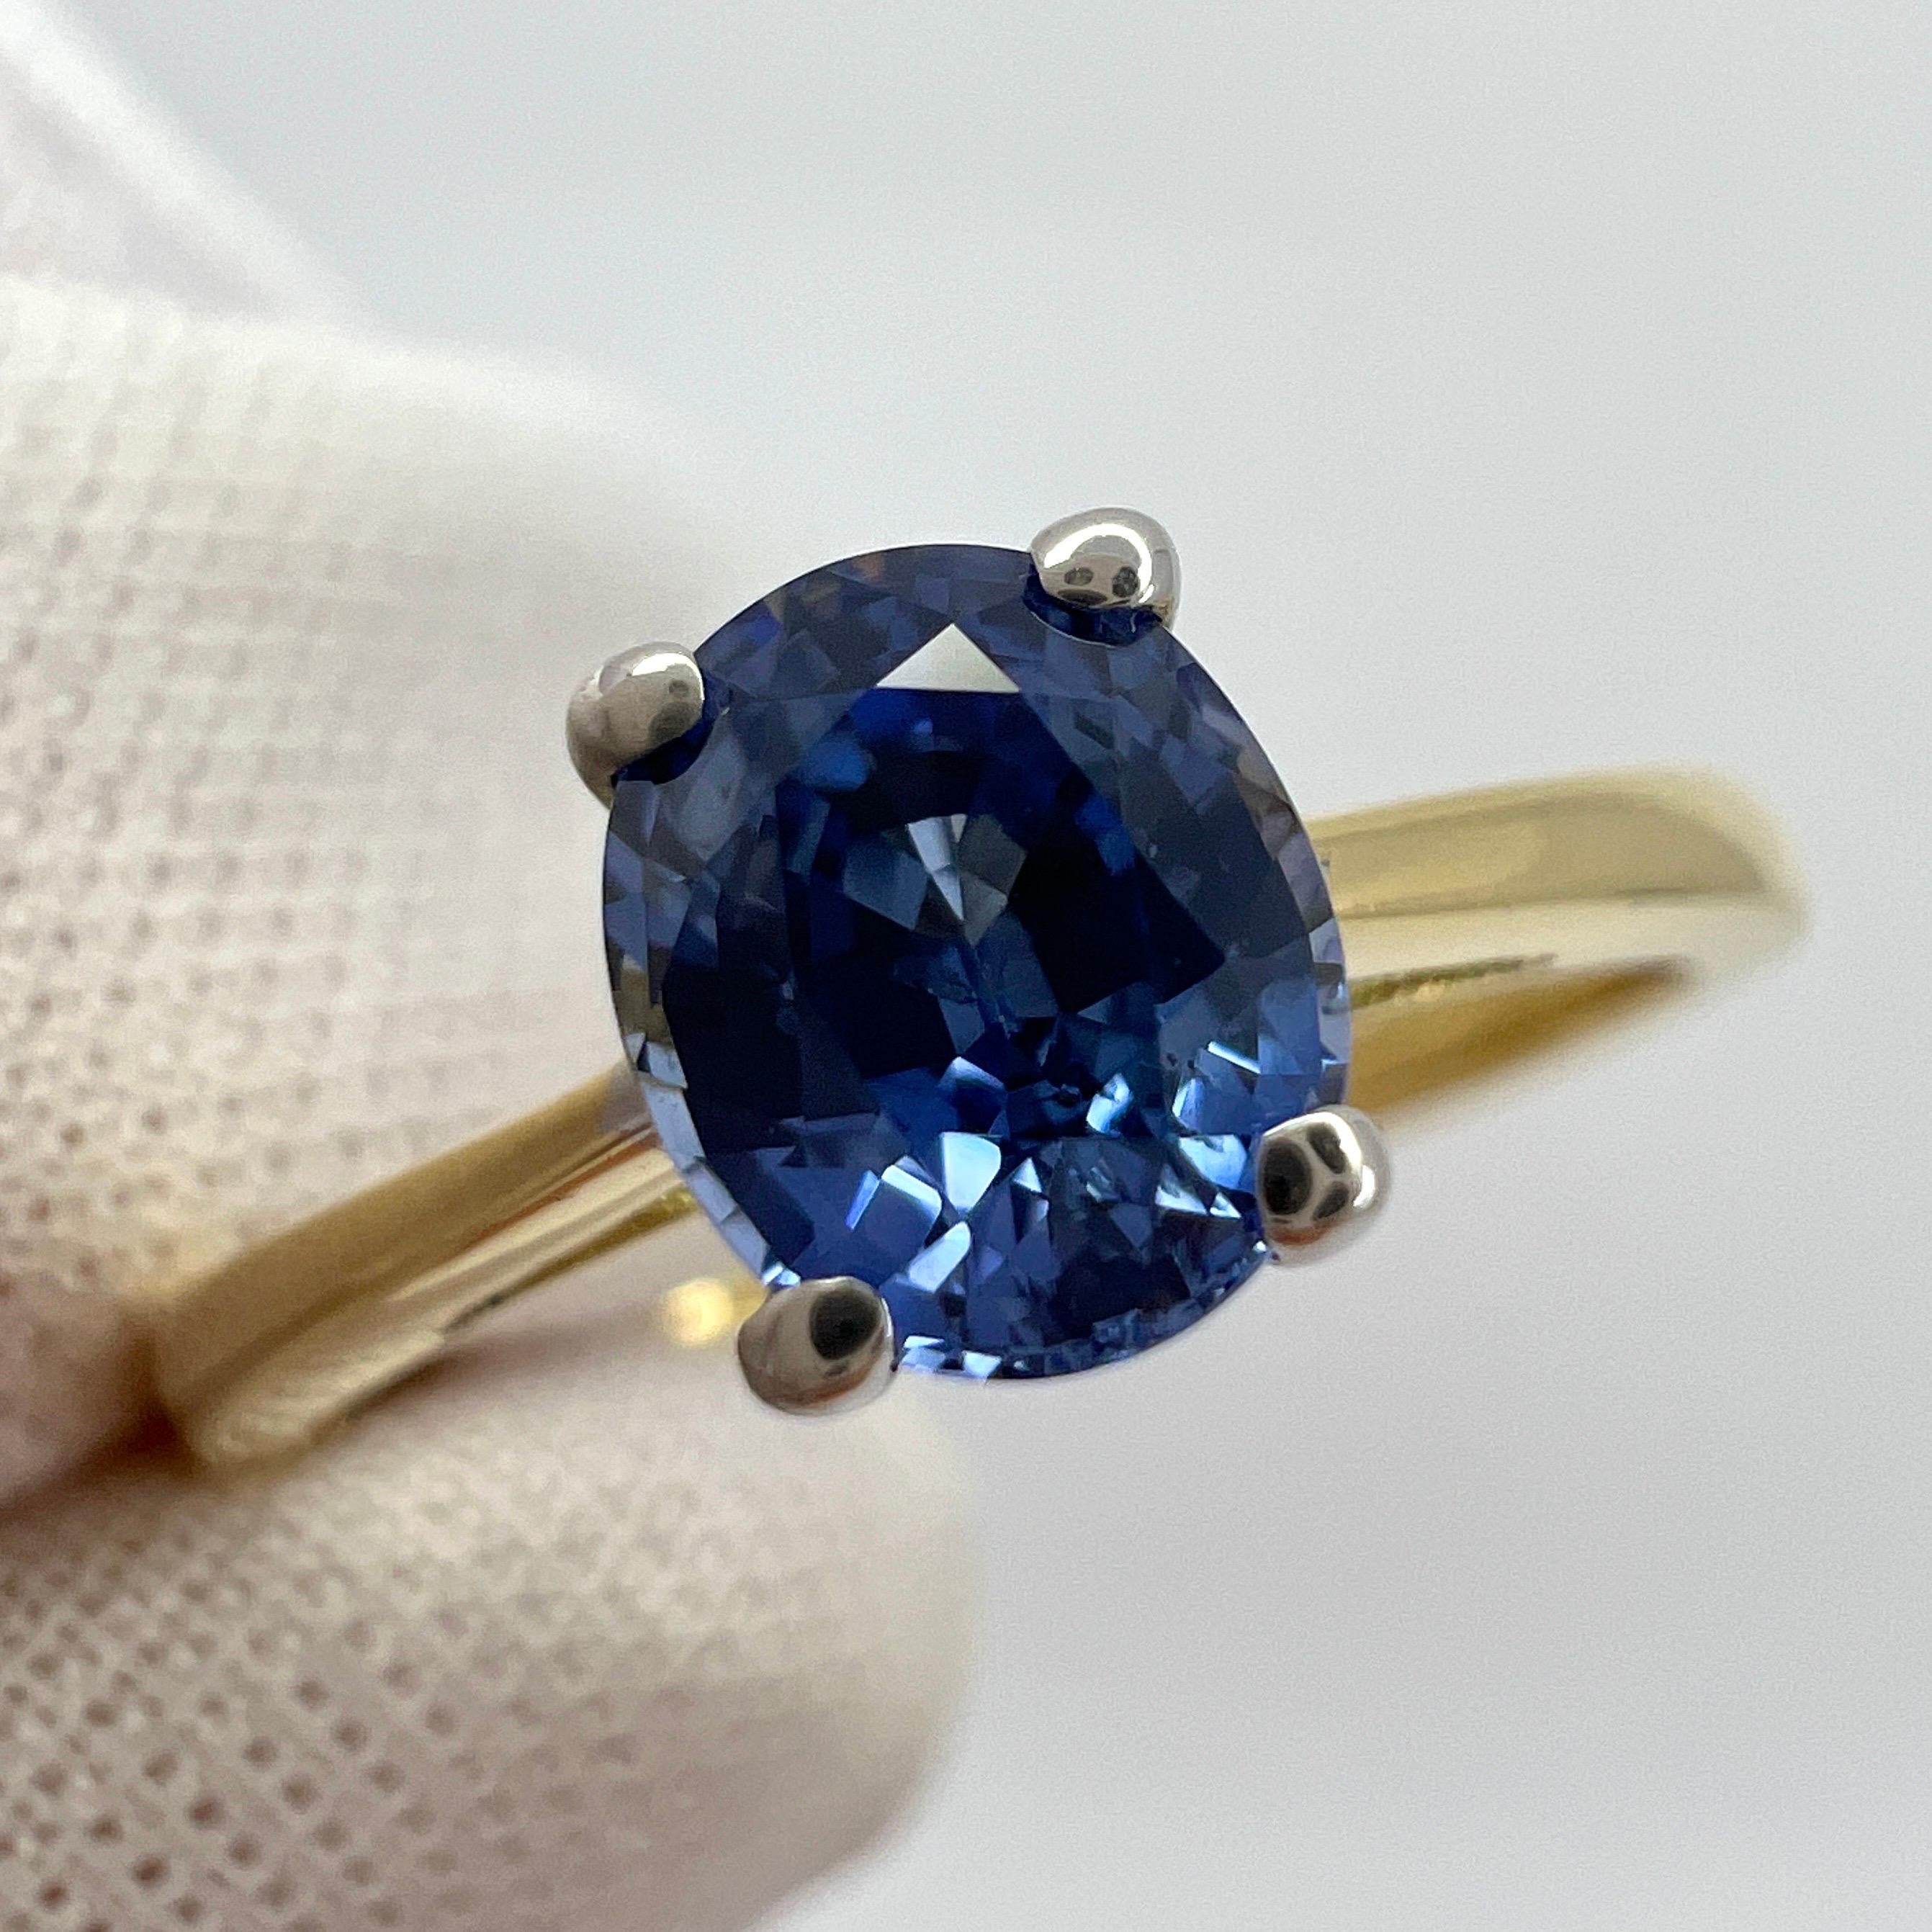 Vivid Cornflower Blue Ceylon Sapphire Oval Cut 18k Yellow & White Gold Solitaire Ring.

1.00 Carat sapphire with a stunning vivid cornflower blue colour and excellent clarity. Very clean stone.

Also has an excellent oval cut which shows lots of